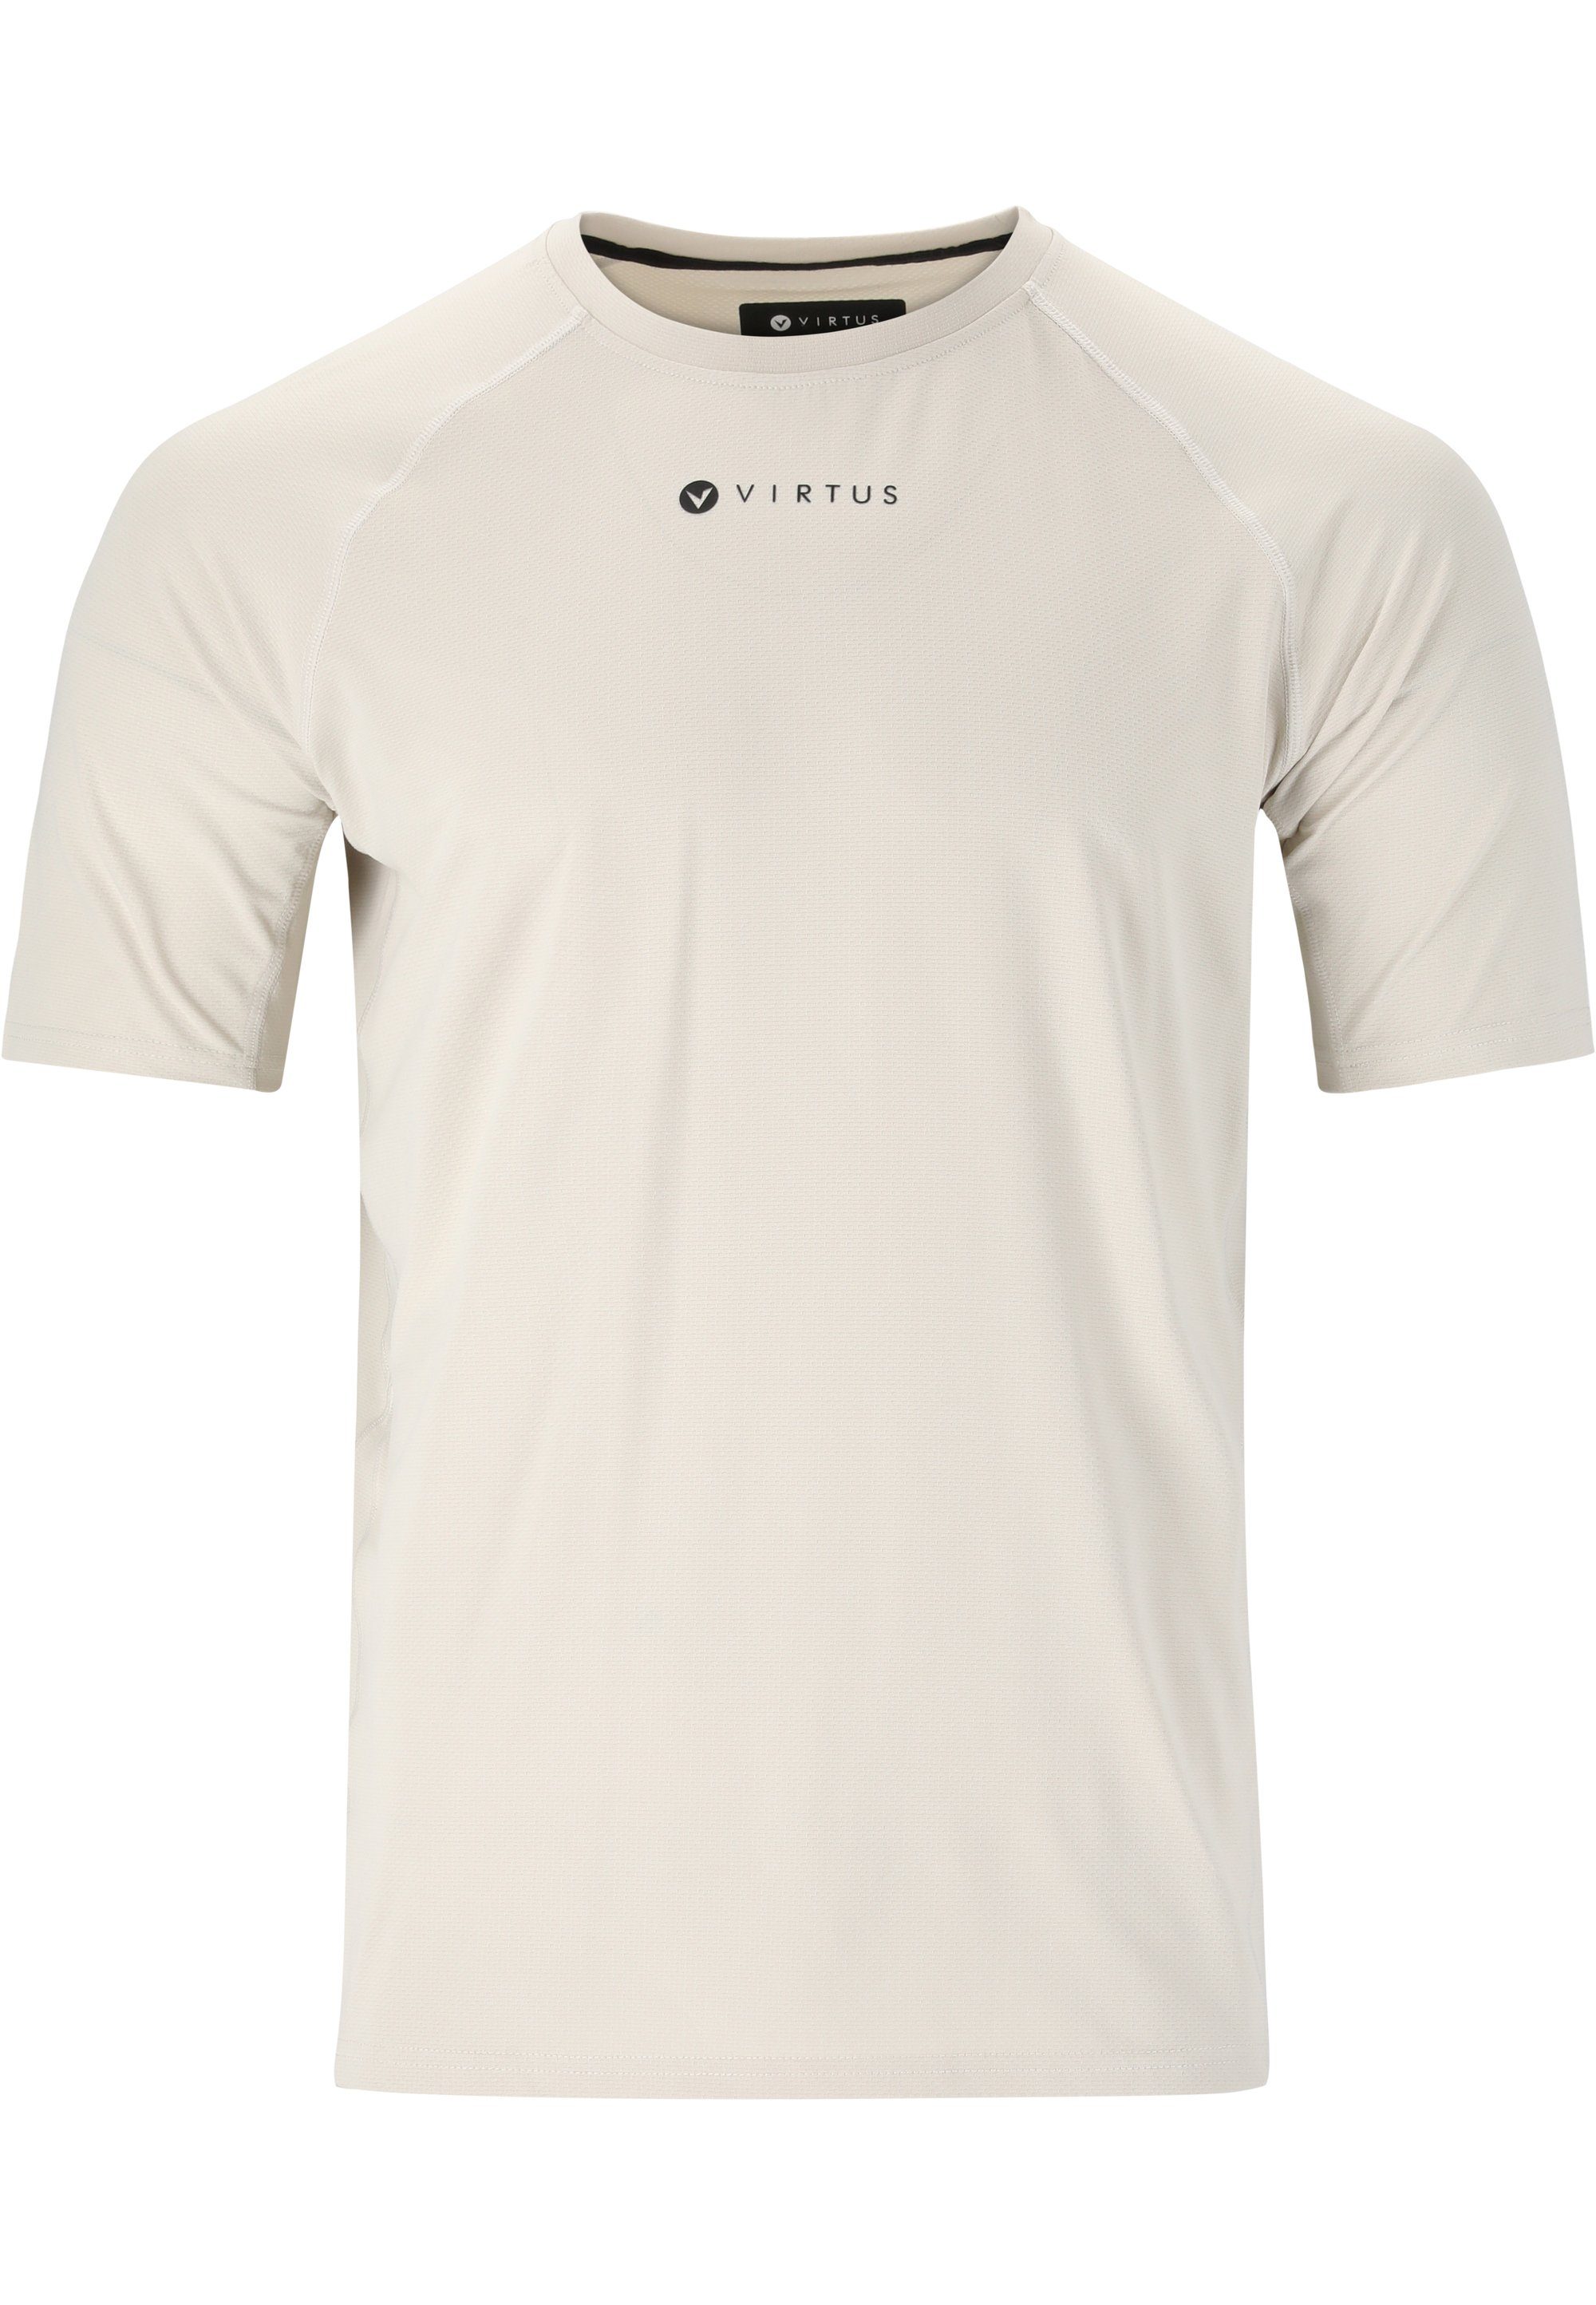 (1-tlg) mit Virtus Silver+-Technologie offwhite Toscan Muskelshirt